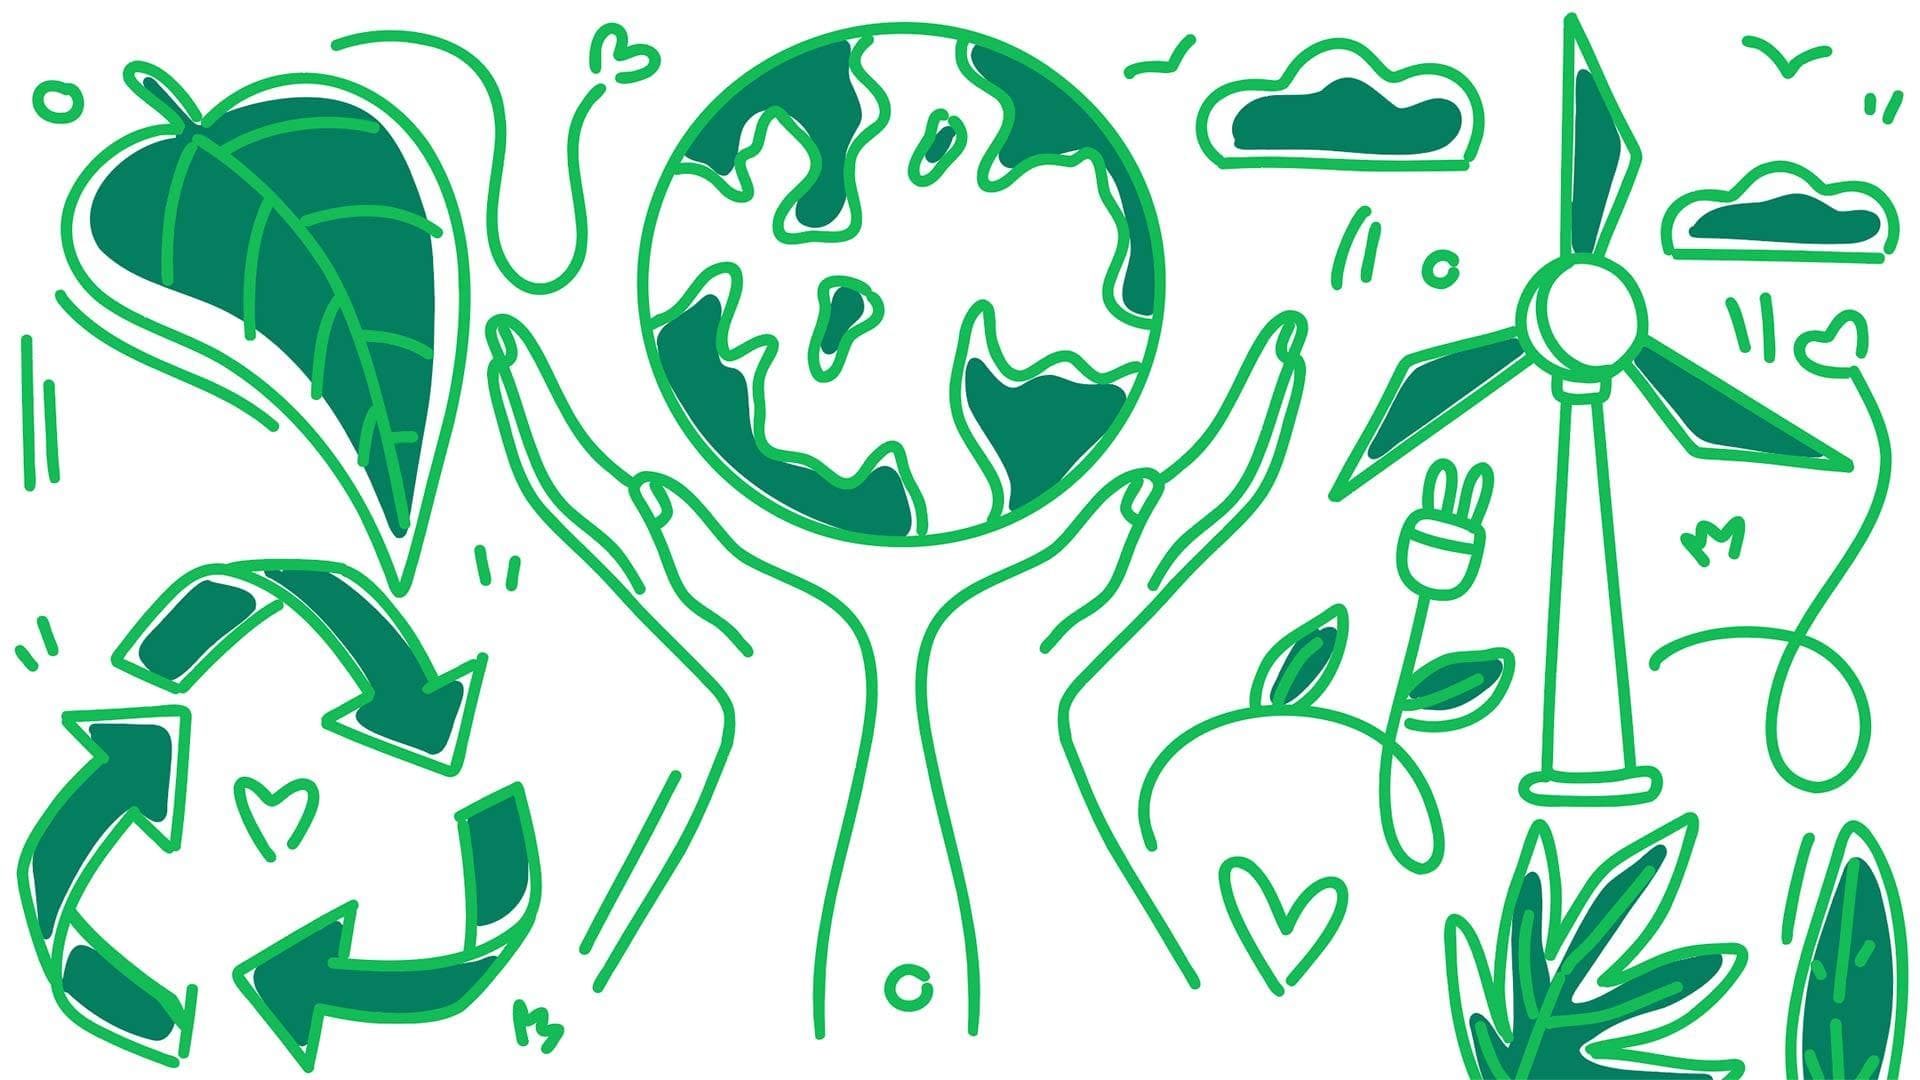 Green illustrations of leaves, recycle symbols, hands holding up a globe, clouds, windmills, electric cords